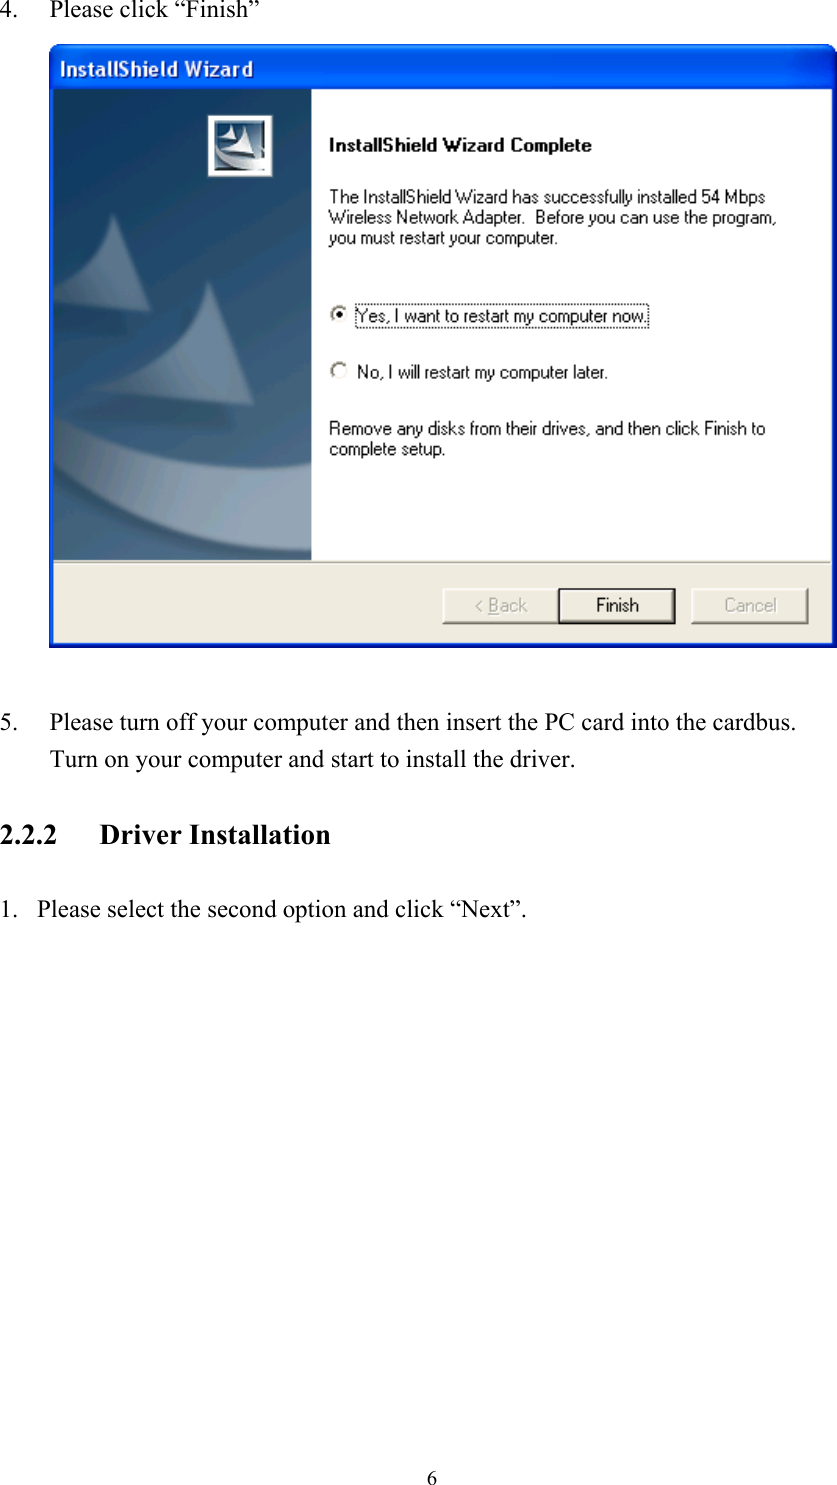 4. Please click “Finish”   5.  Please turn off your computer and then insert the PC card into the cardbus.   Turn on your computer and start to install the driver. 2.2.2 Driver Installation 1.  Please select the second option and click “Next”.  6